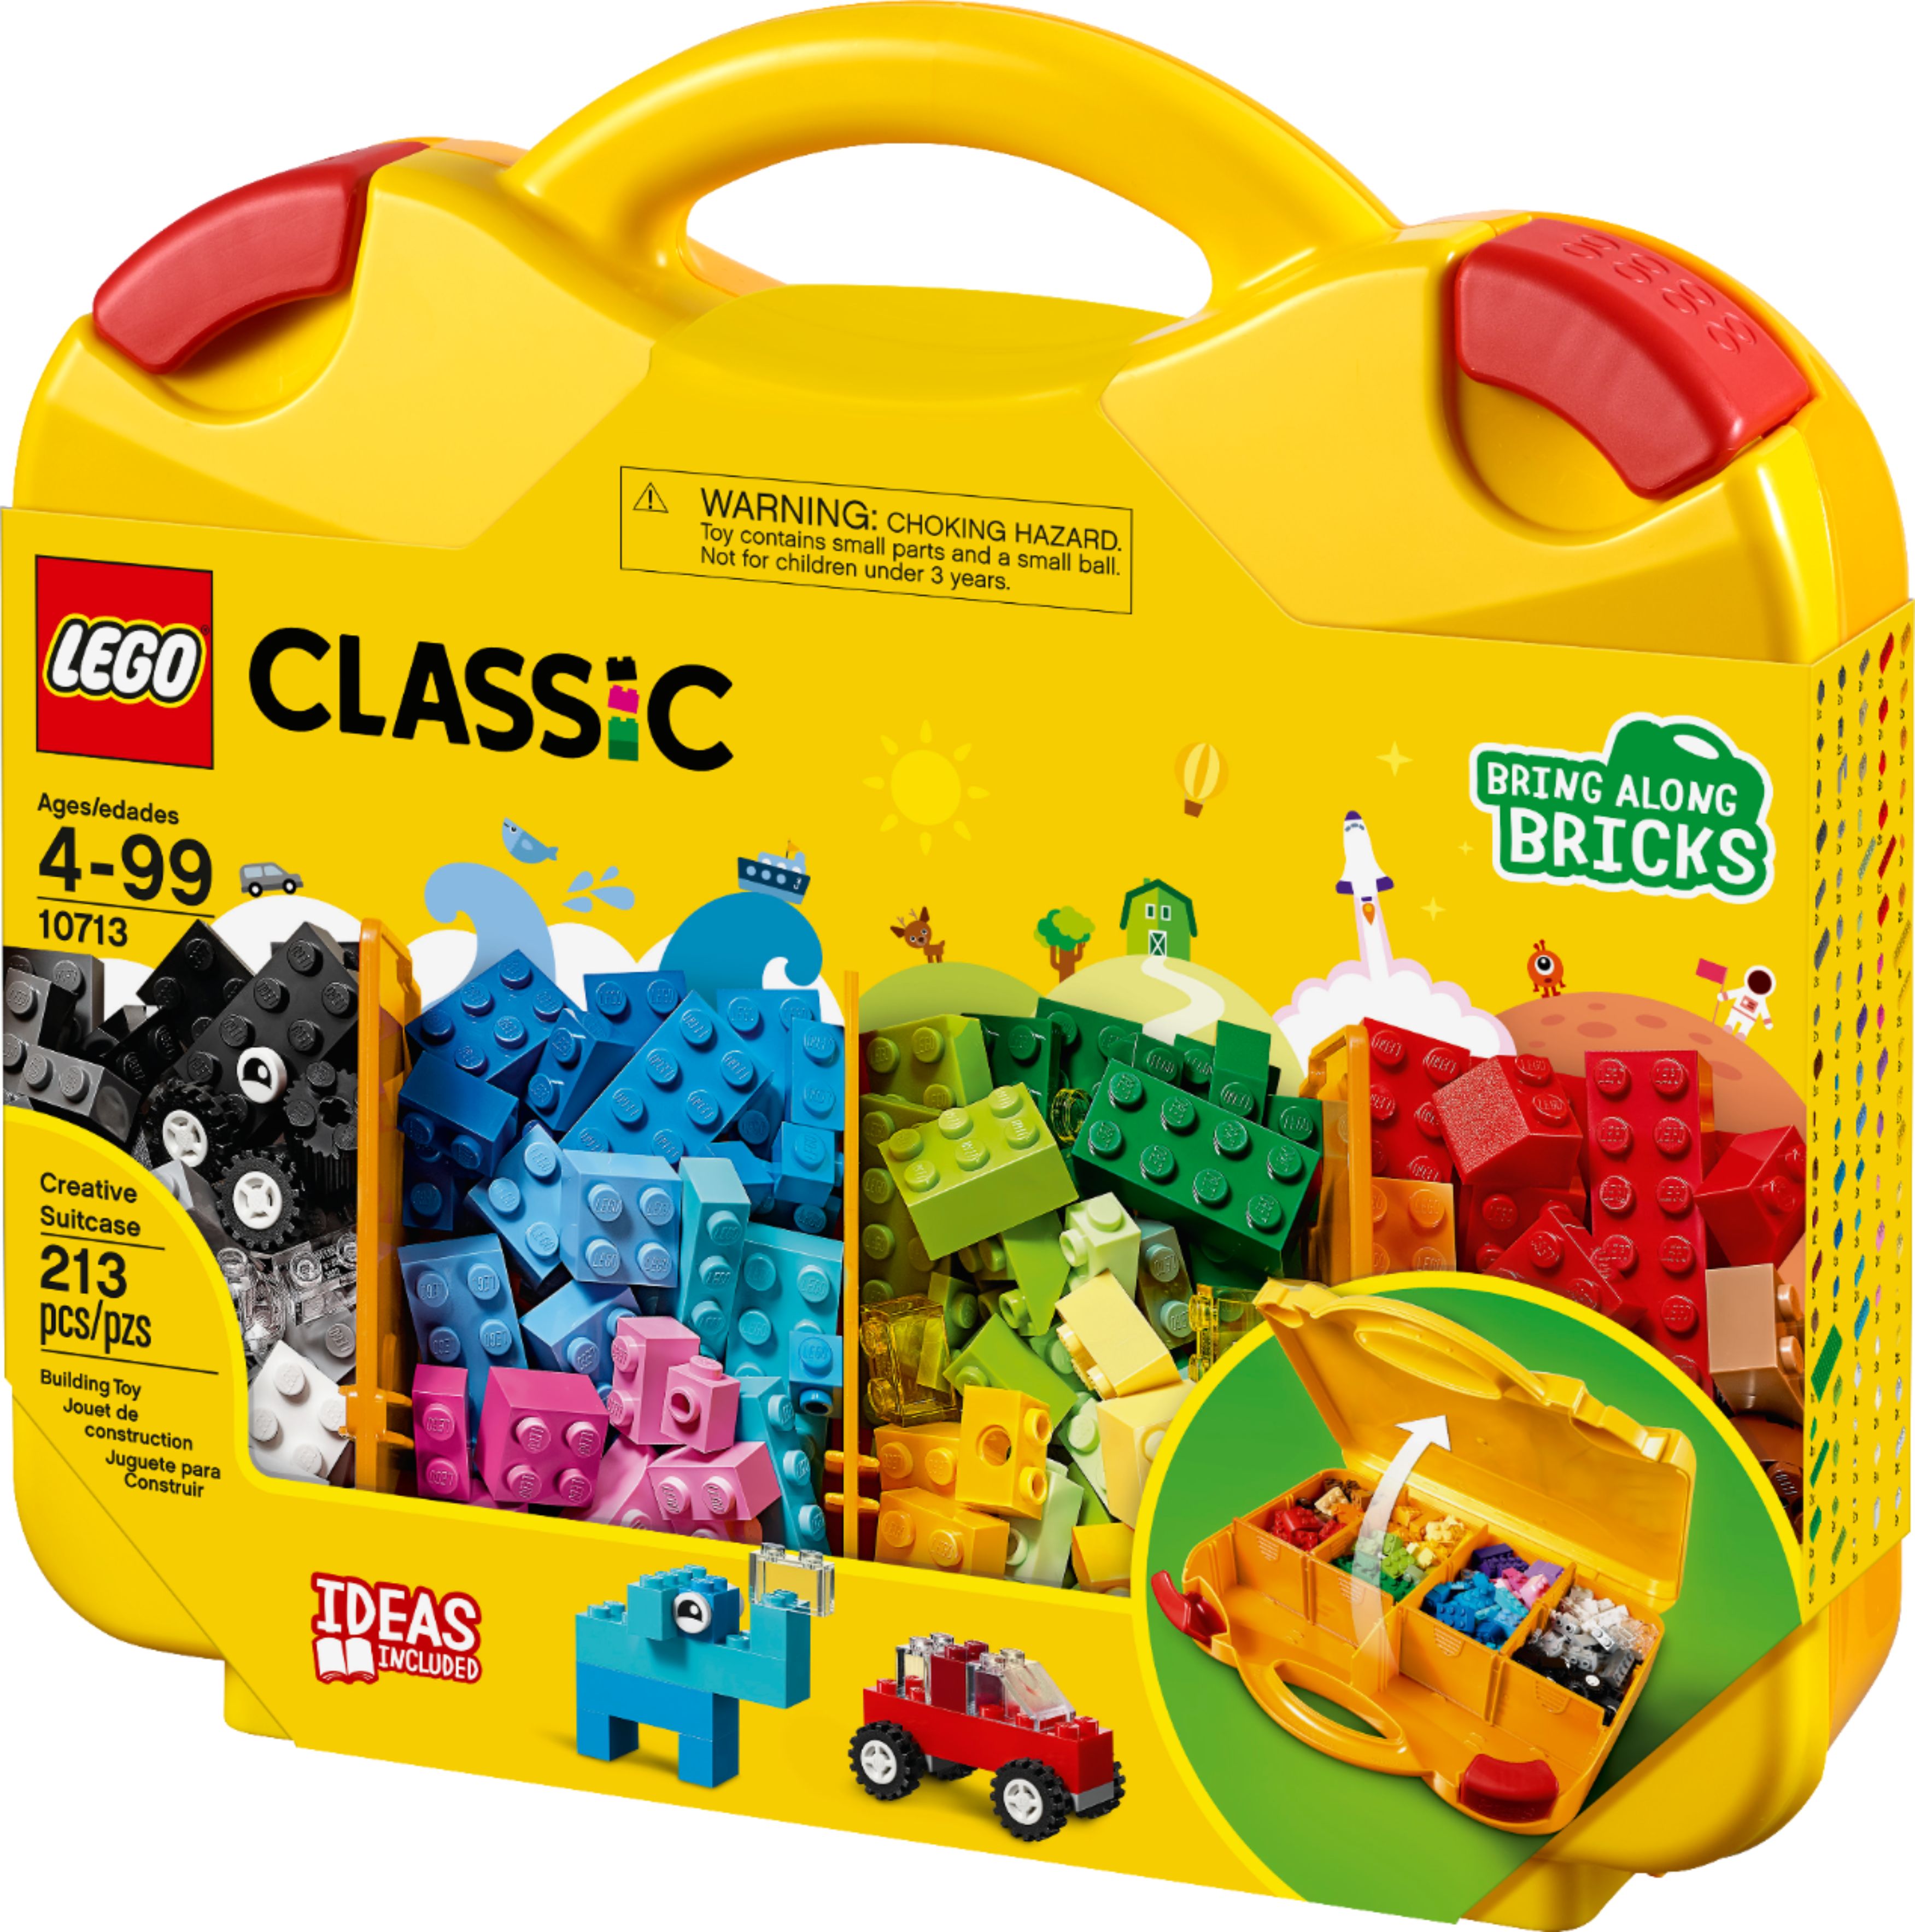 VEHICLES Lego classic 10713 ideas How to build easy 